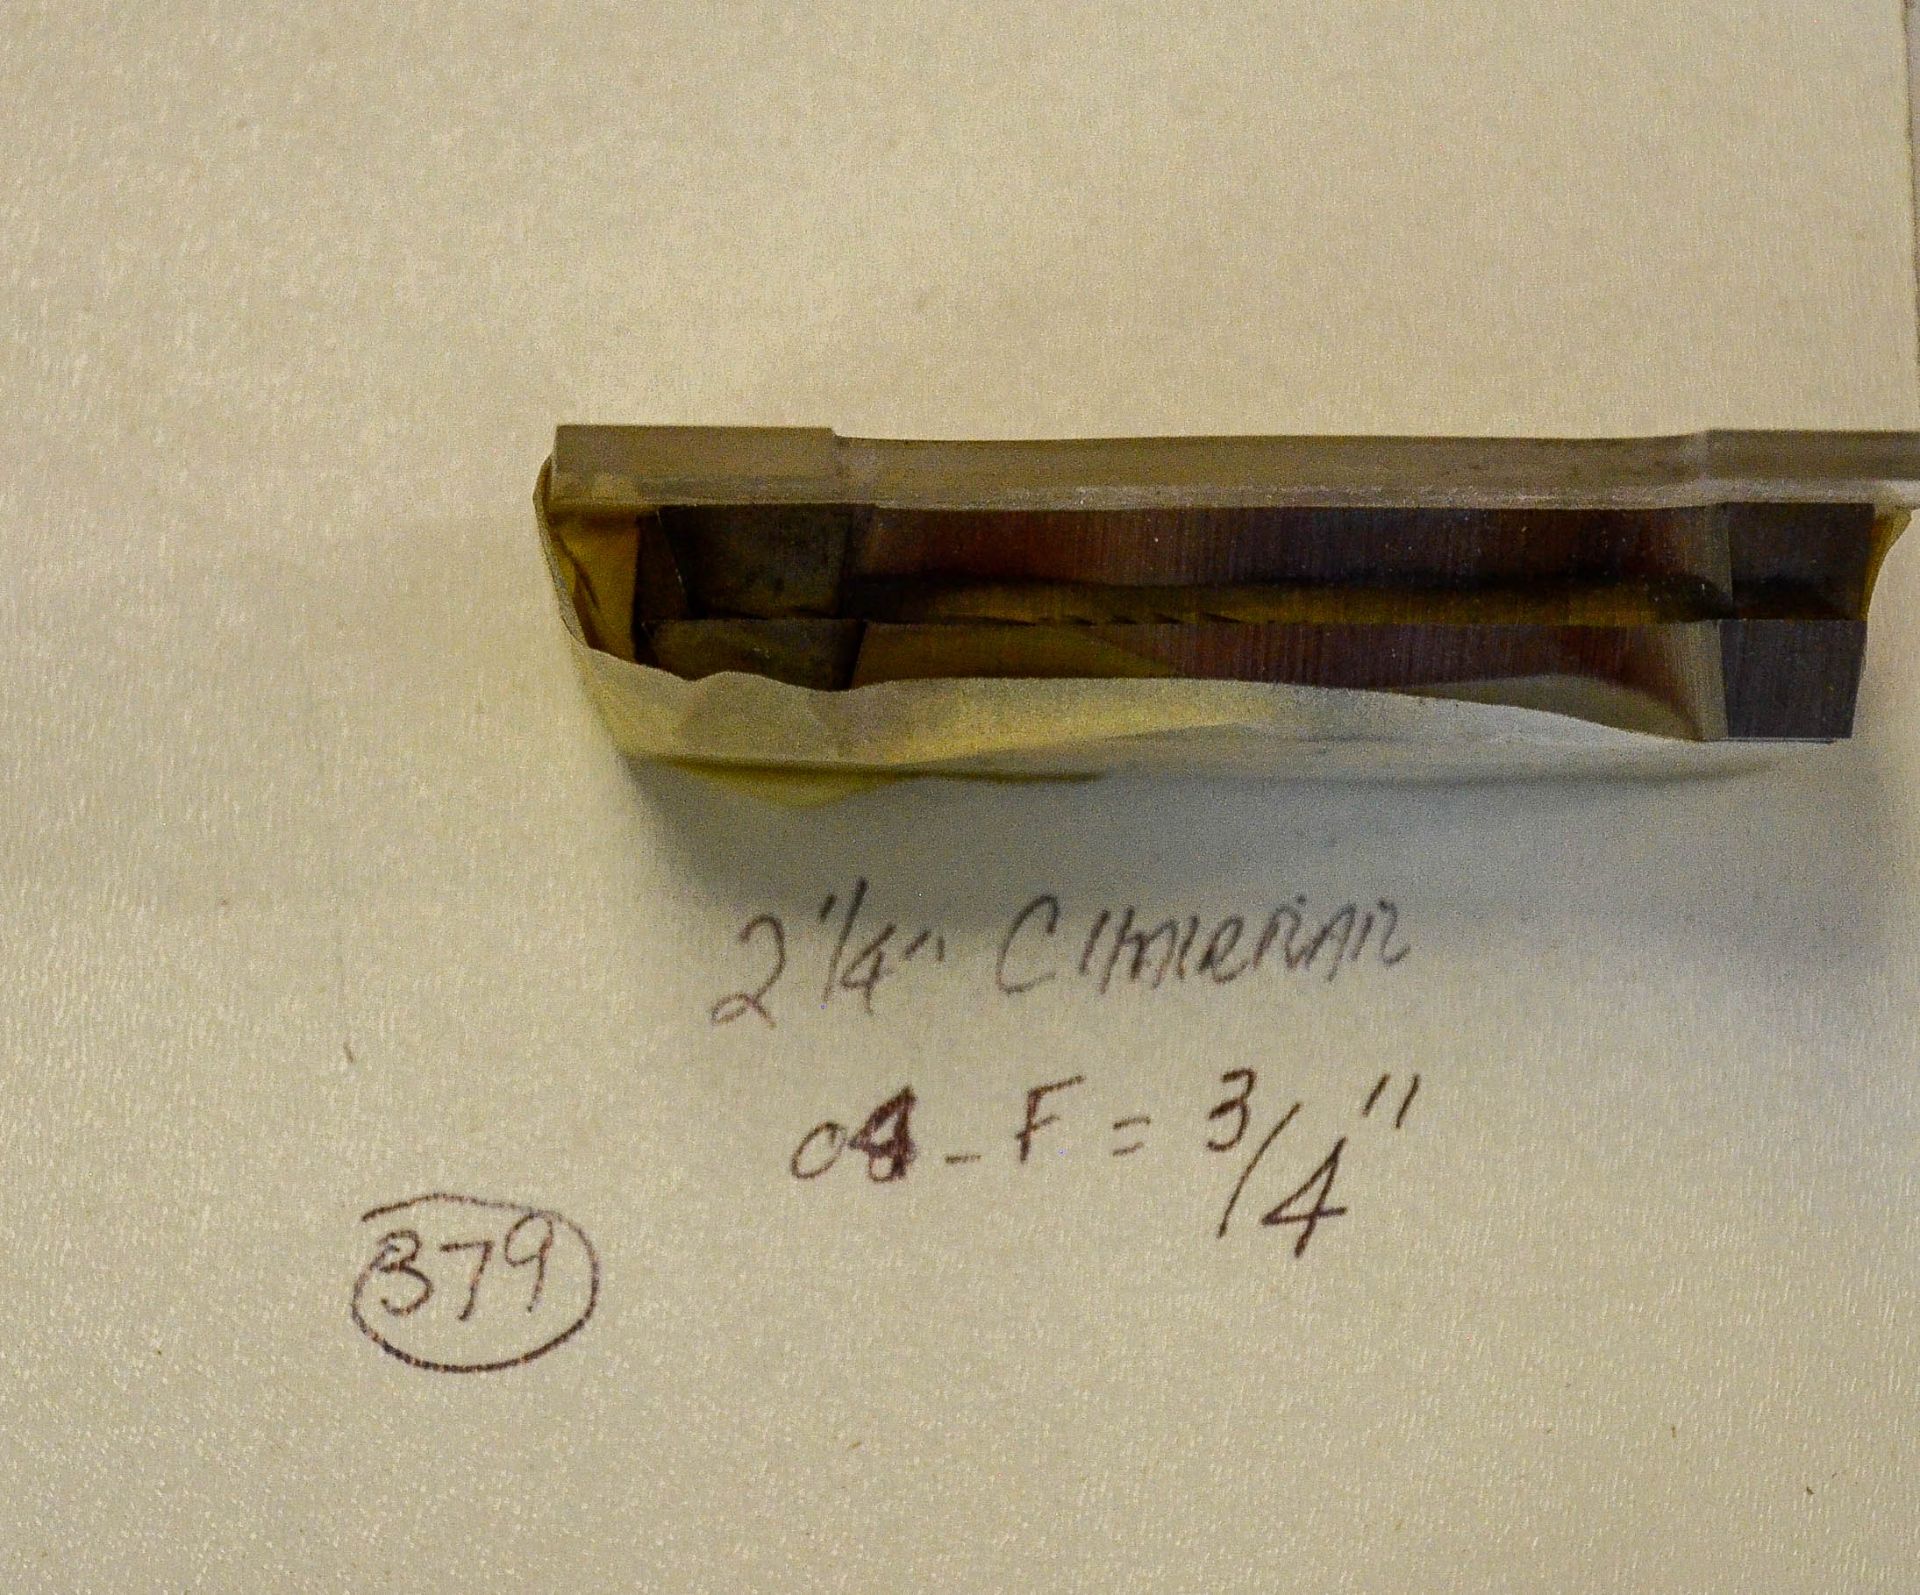 Moulding Knives, 2-1/4" ChairRail, 04 - F = 3/4", Knives are in Good Condition and Ready to Use ( - Image 2 of 2